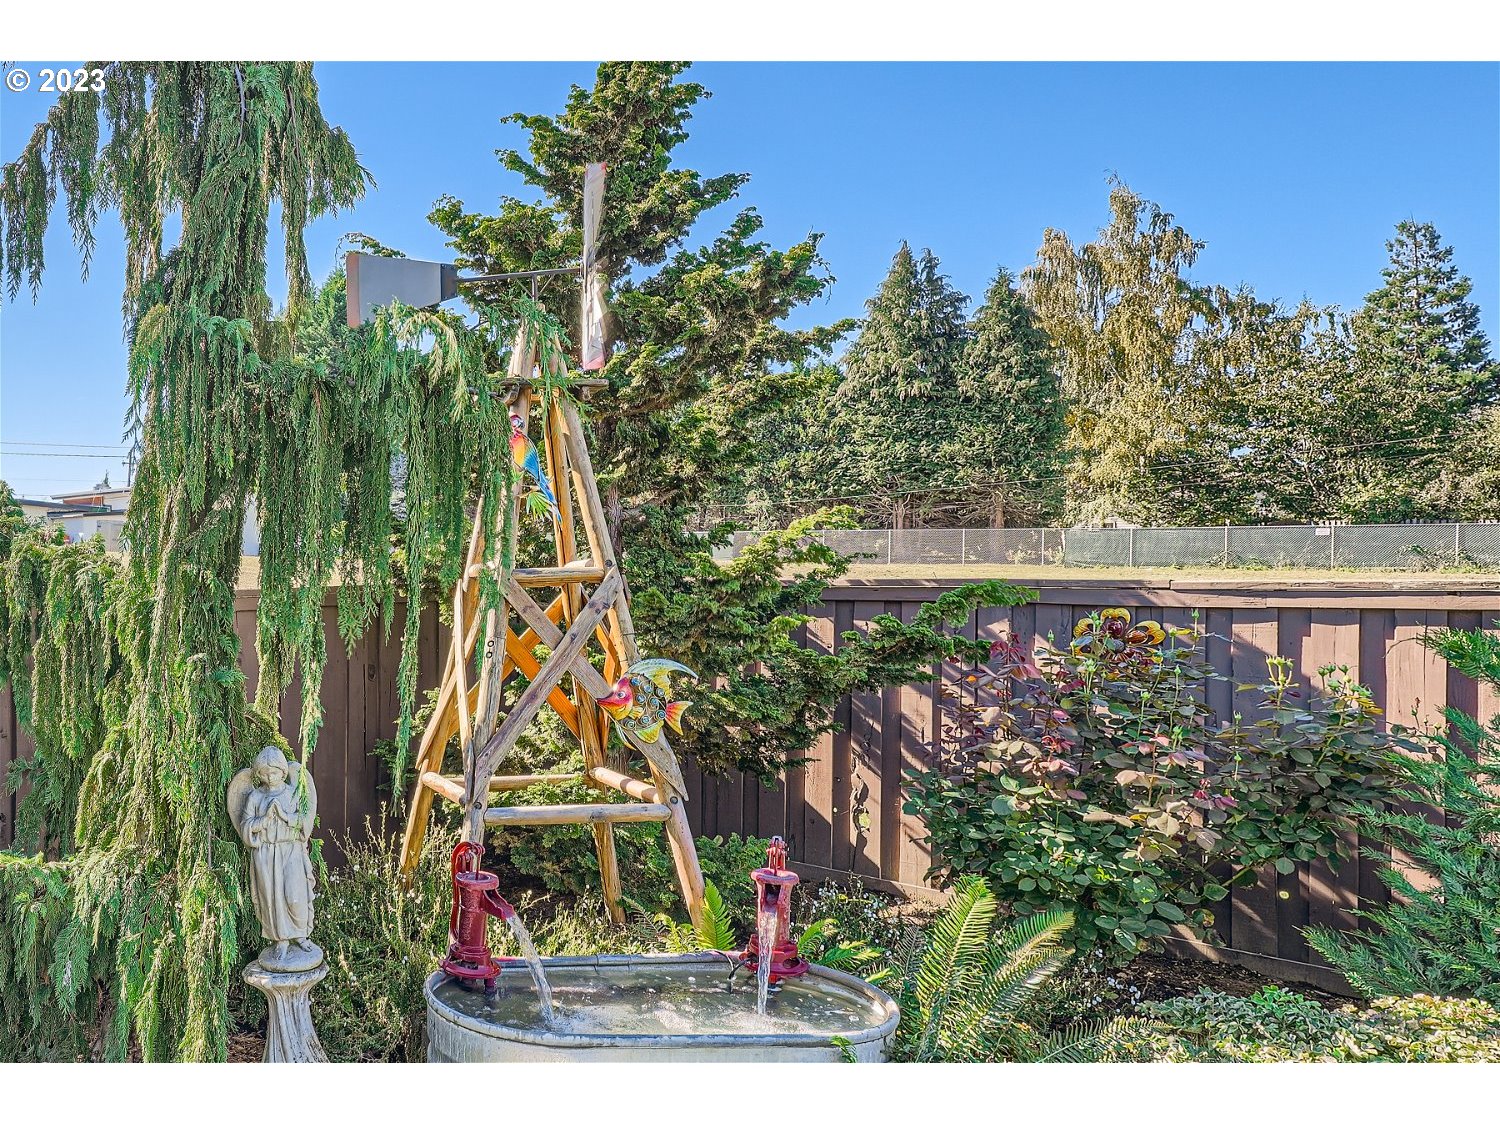 12006 NW 17TH AVE, Vancouver, 5 Bedrooms Bedrooms, ,3.1 BathroomsBathrooms,Residential,For Sale,17TH,23350276